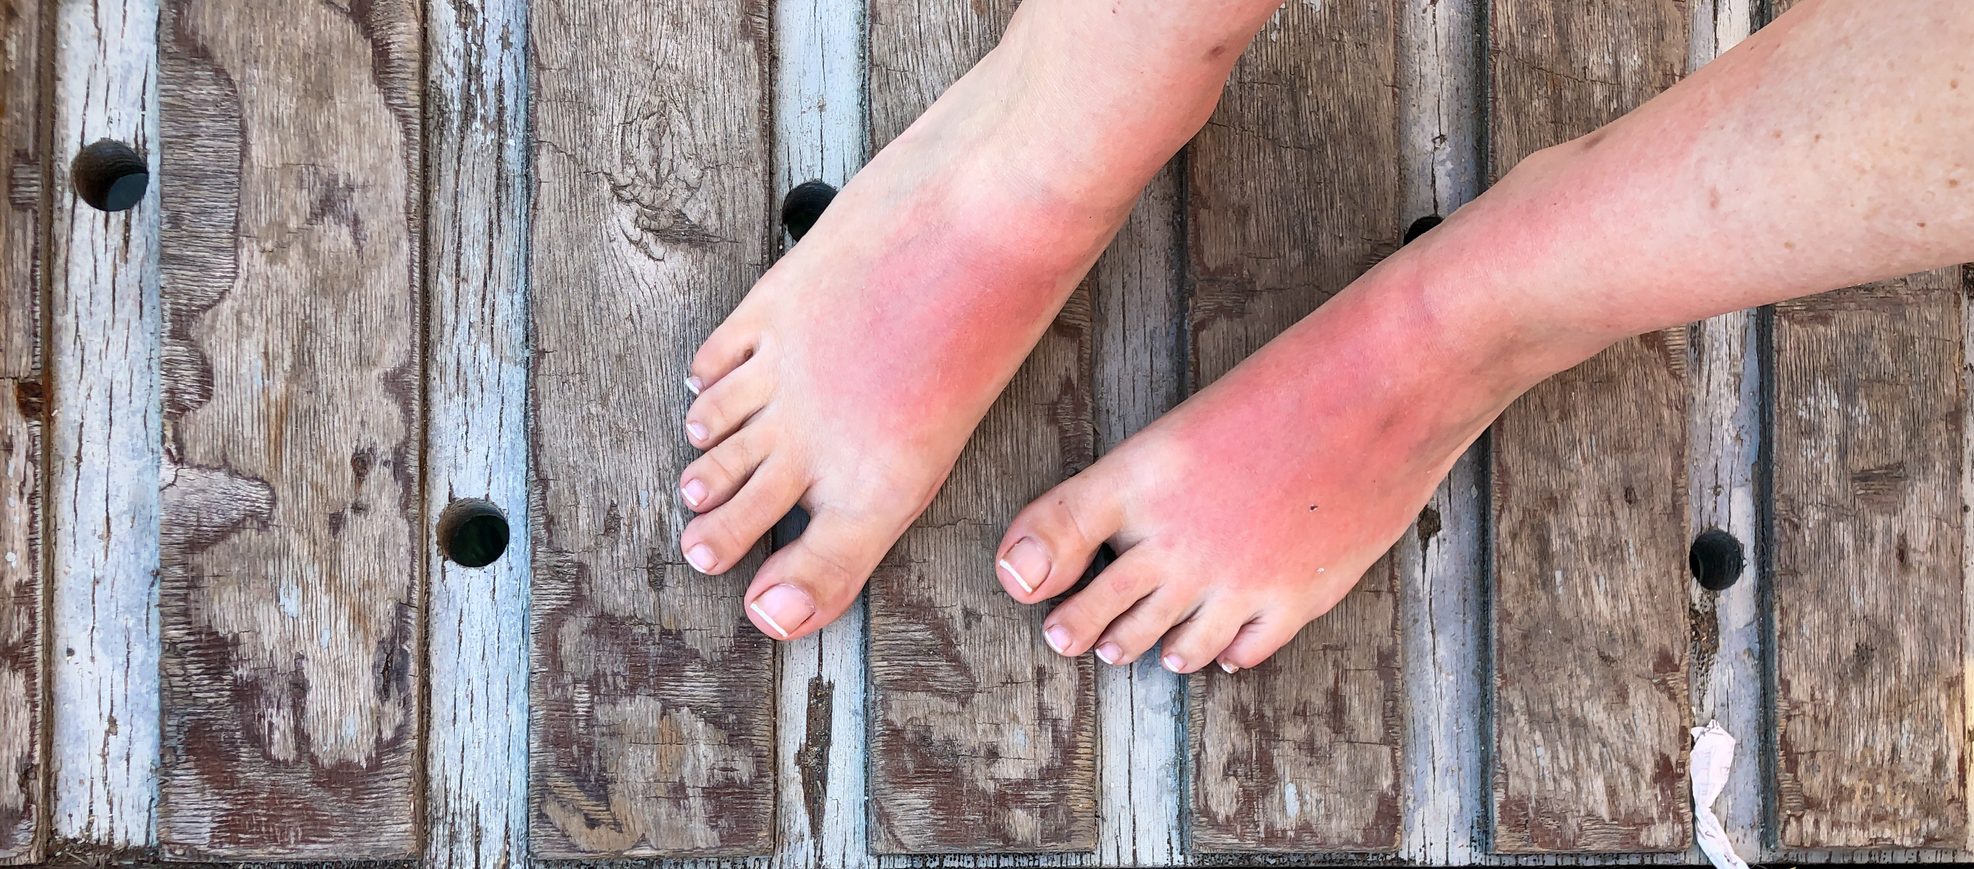 Are My Baby's Feet Swollen or Fat: Learn How to Tell